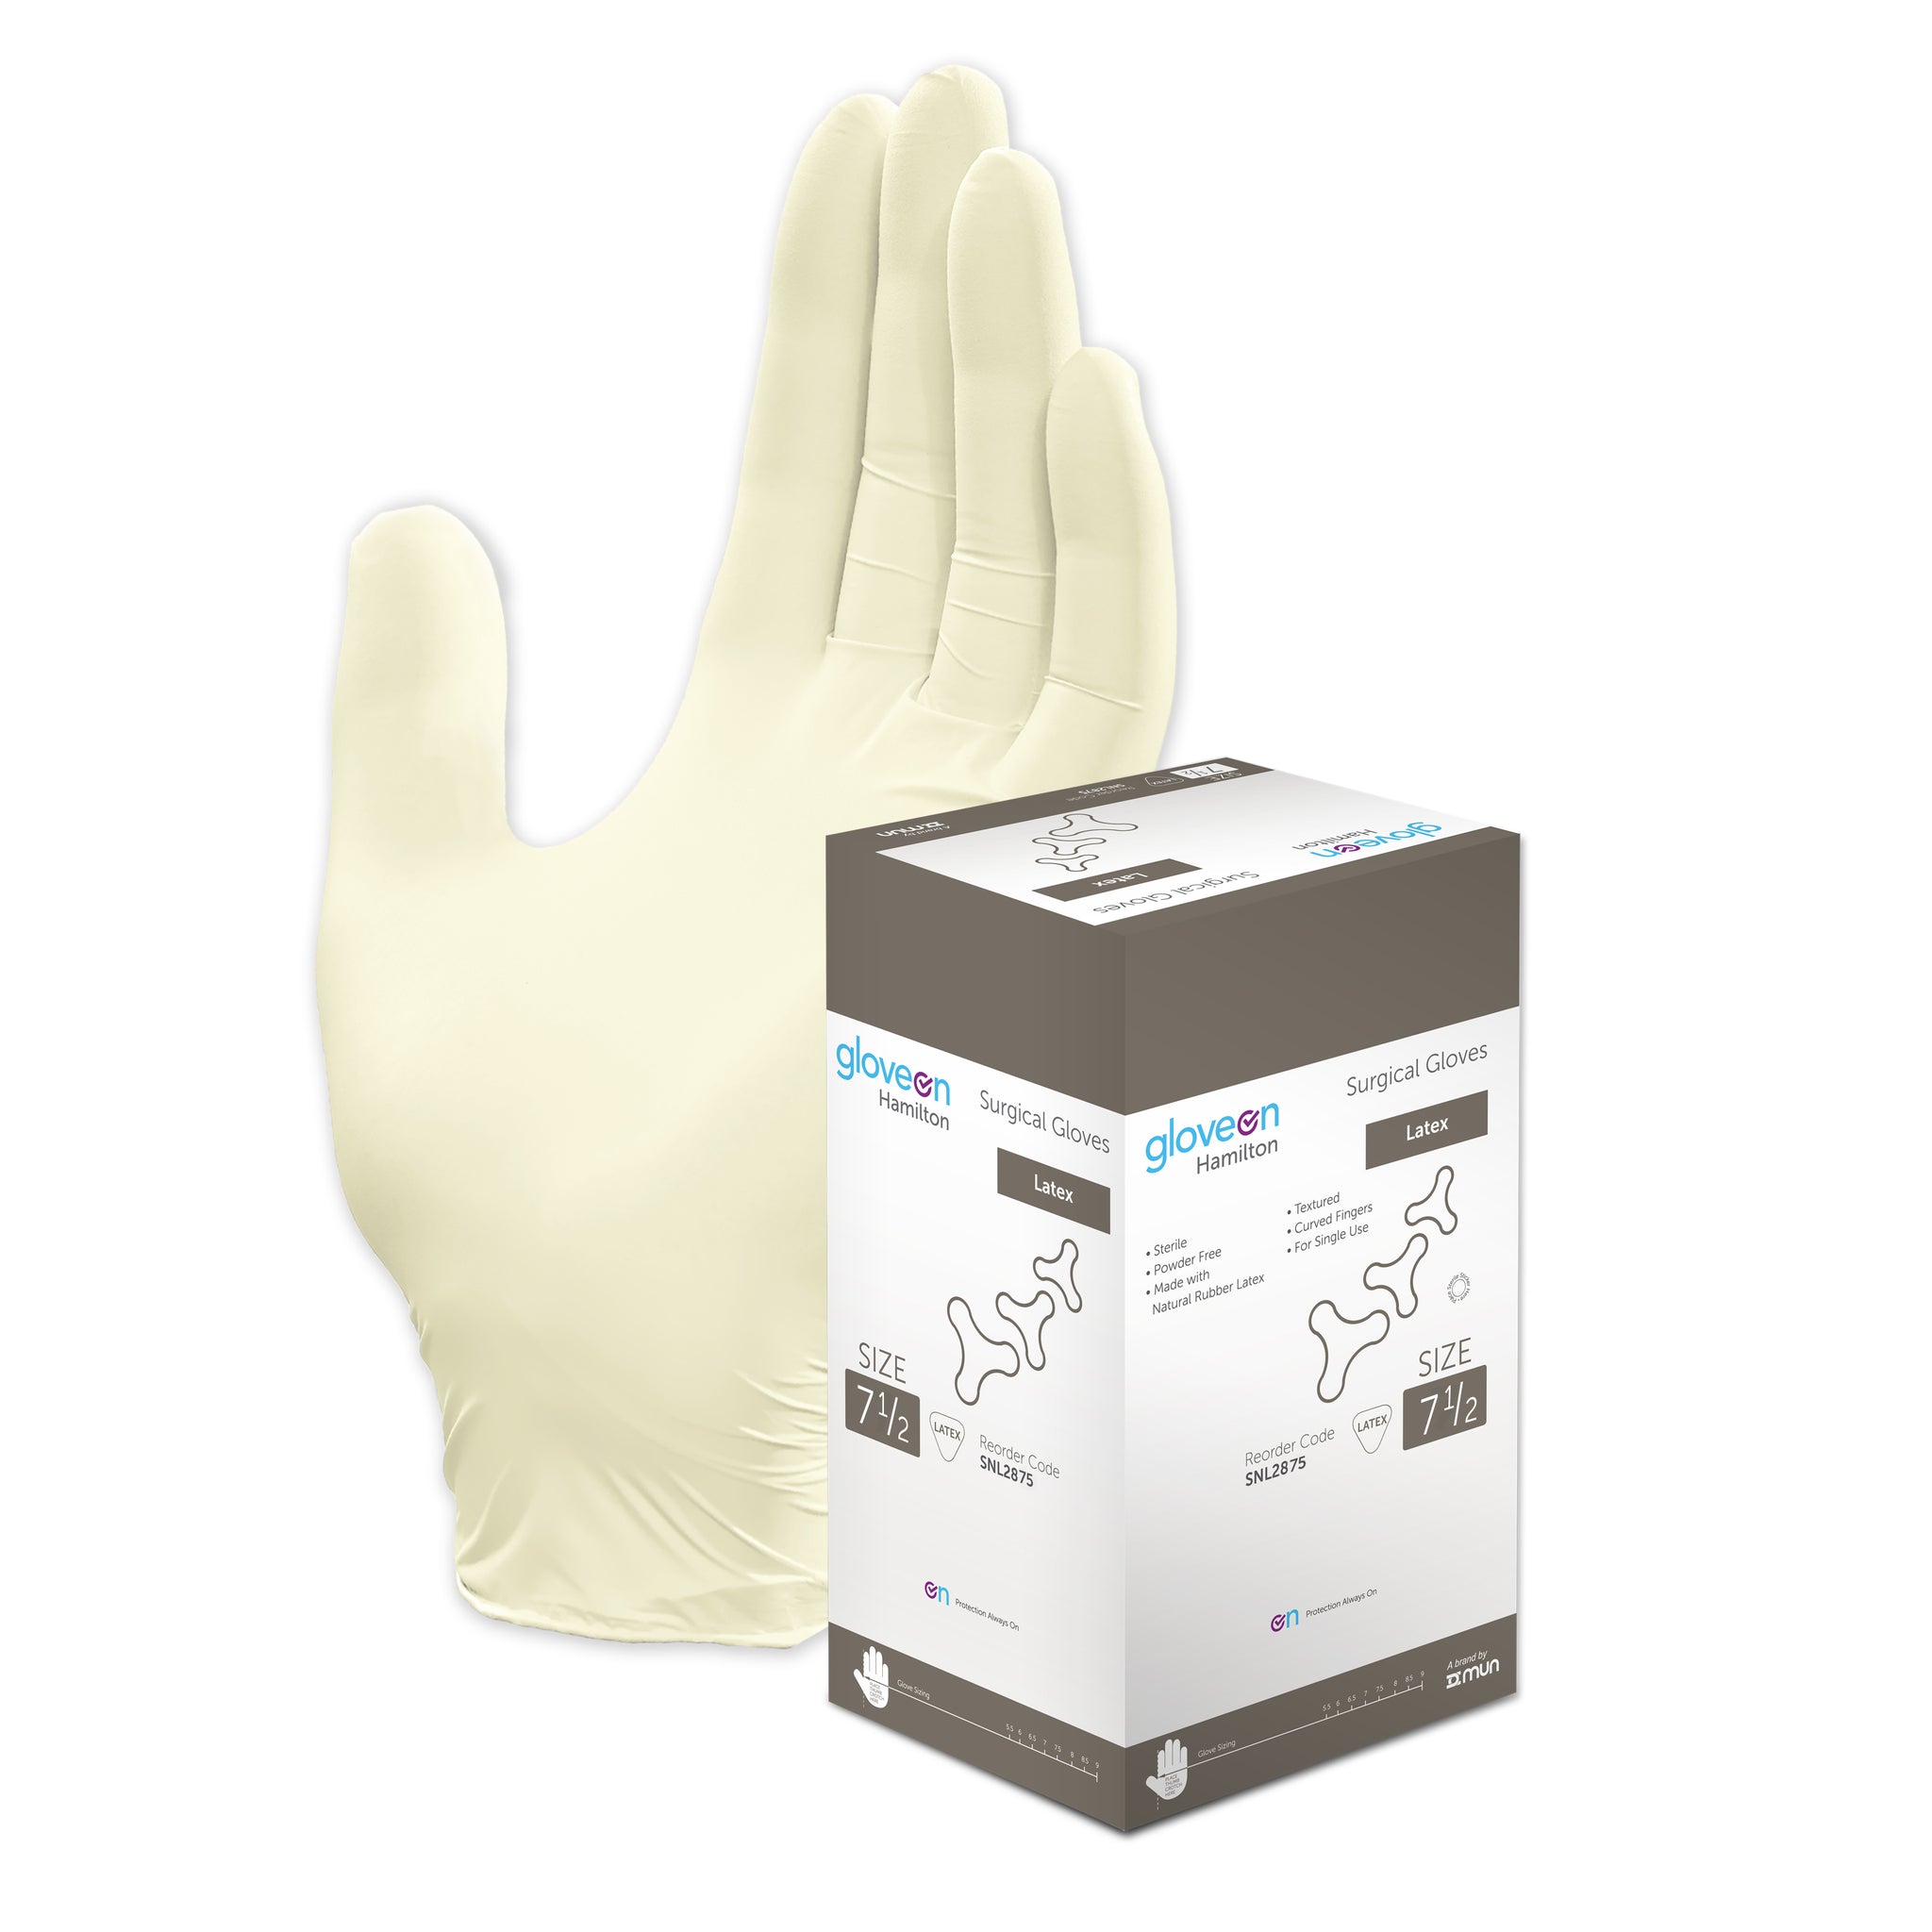 Latex, Powder Free, Textured, Curved Fingers, Sterile, Natural Colour - Box of 100, 7.5